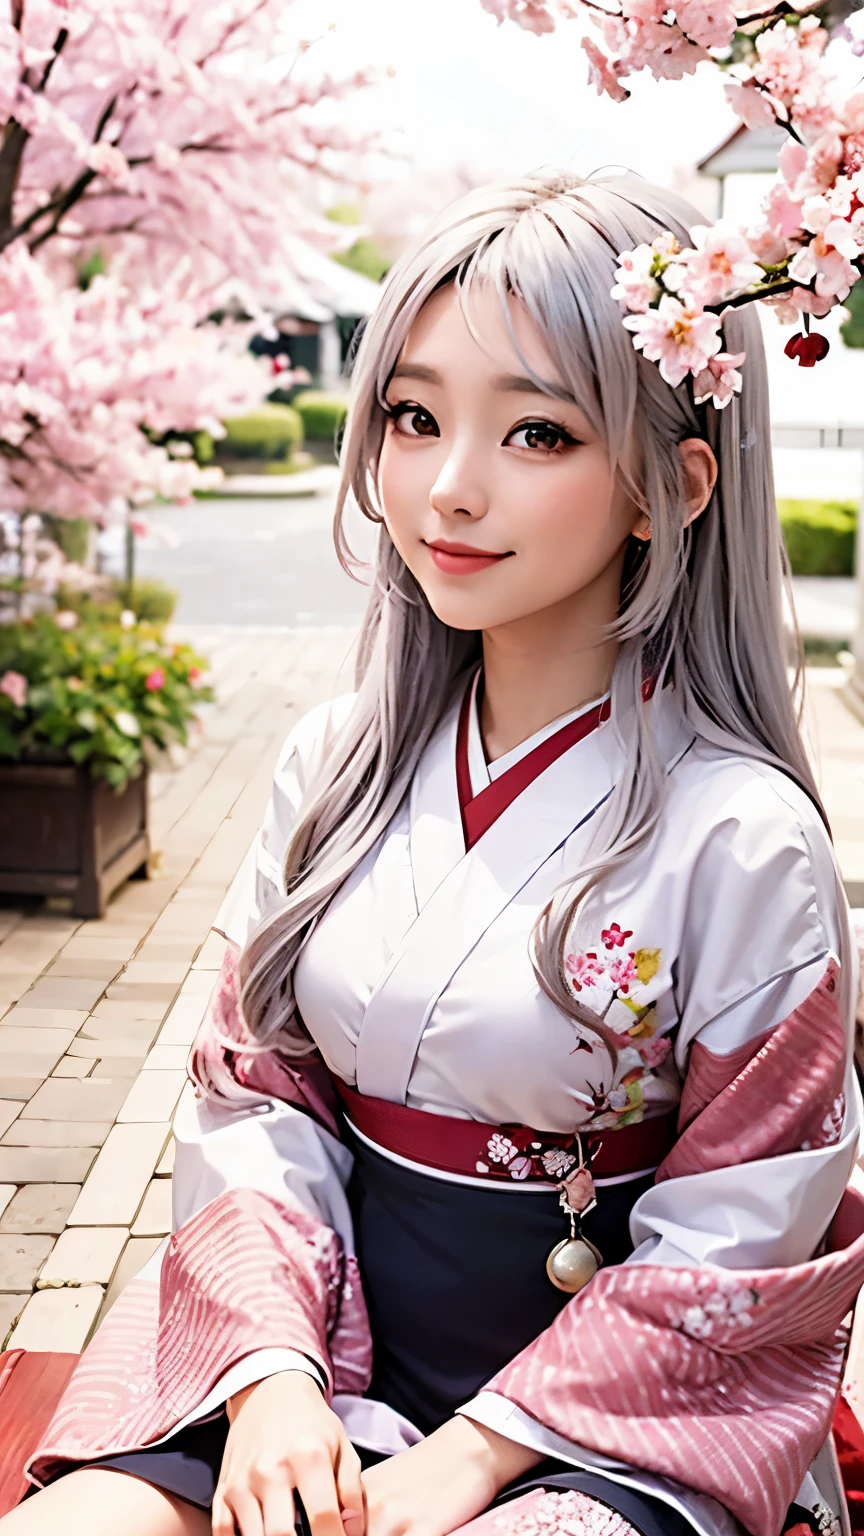 celestial nine-tail fox goddess, beautiful anime girl, white silver hair, sitting under the cherry blossoms, spring, cherry blossoms in hair, smiling, wearing japanese style kimono with beautiful ornaments